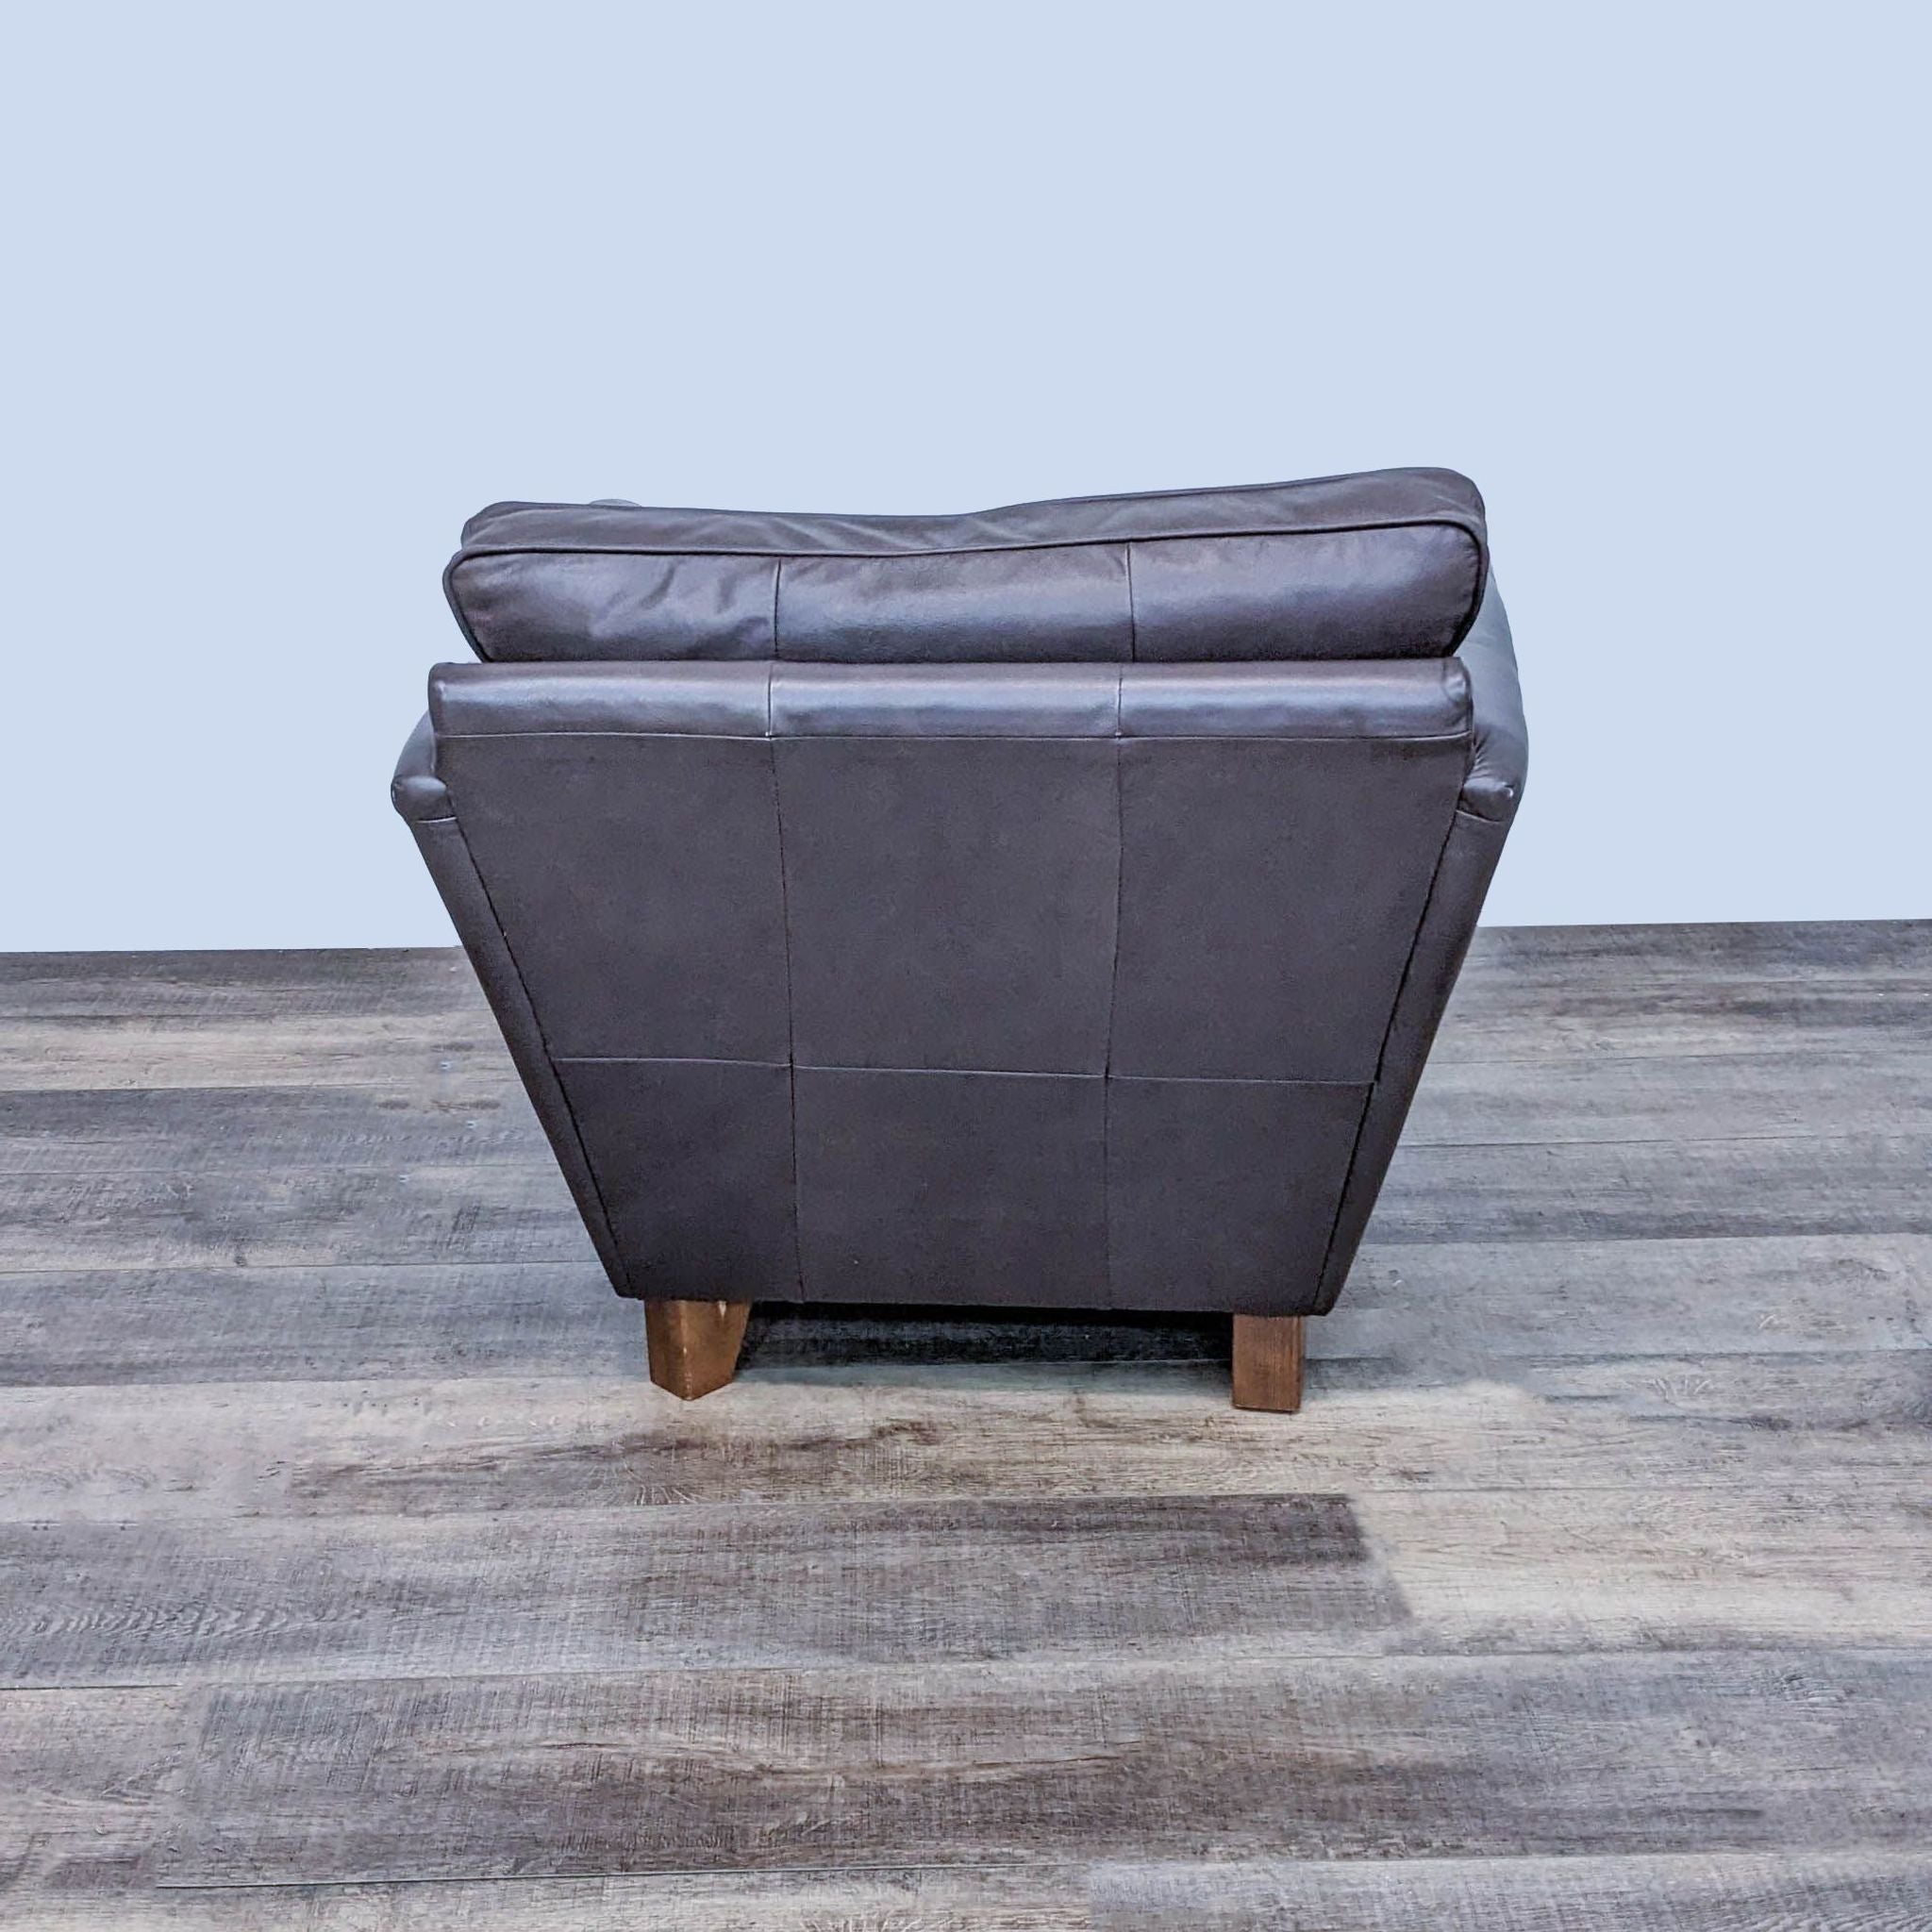 Marks & Spencer contemporary dark leather armchair with tapered wooden feet, viewed from the back.